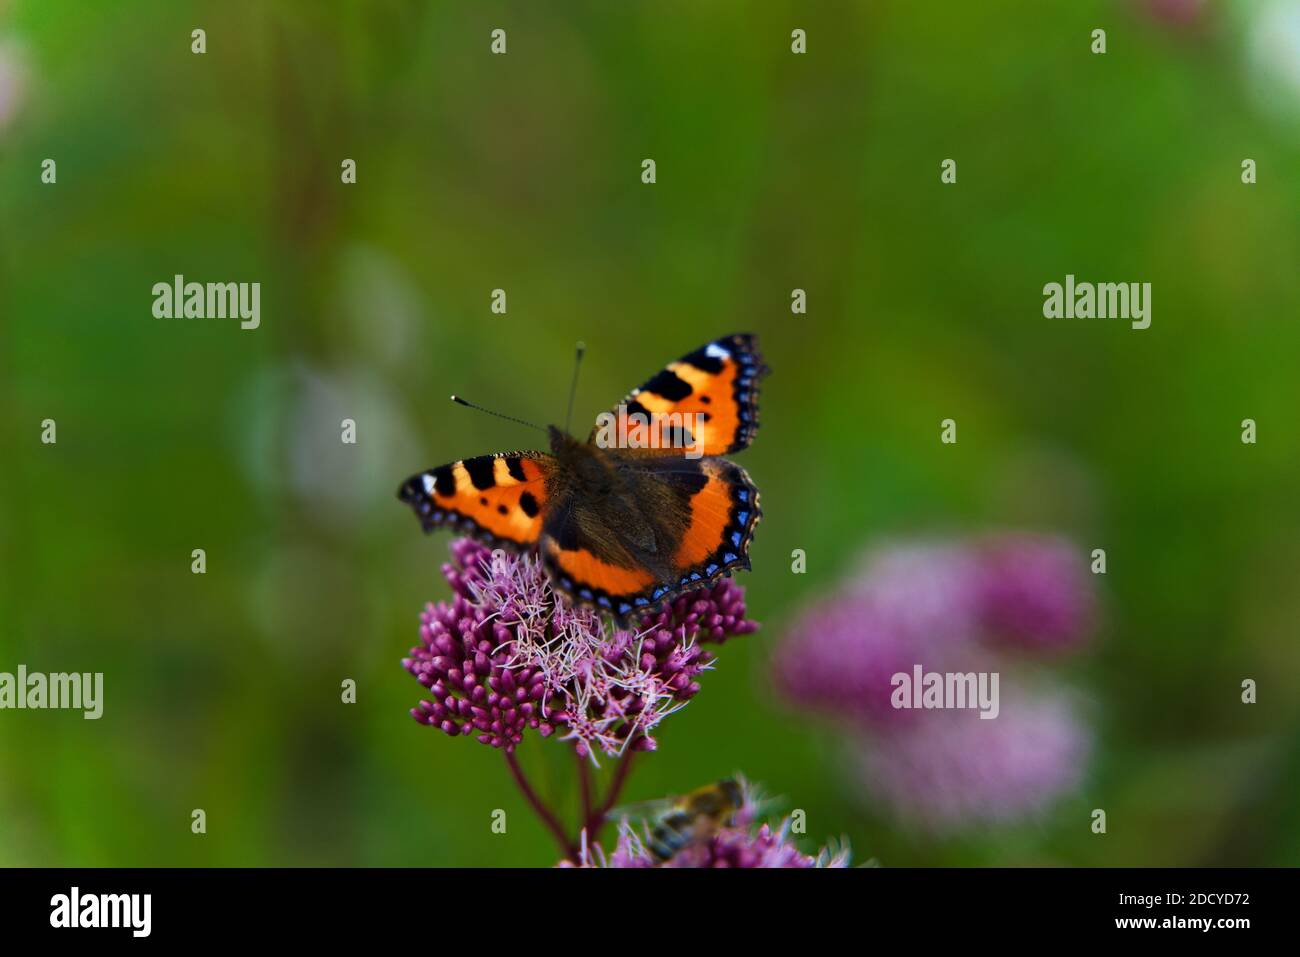 Butterfly with open wings sitting on a plant with green bokeh background. Stock Photo